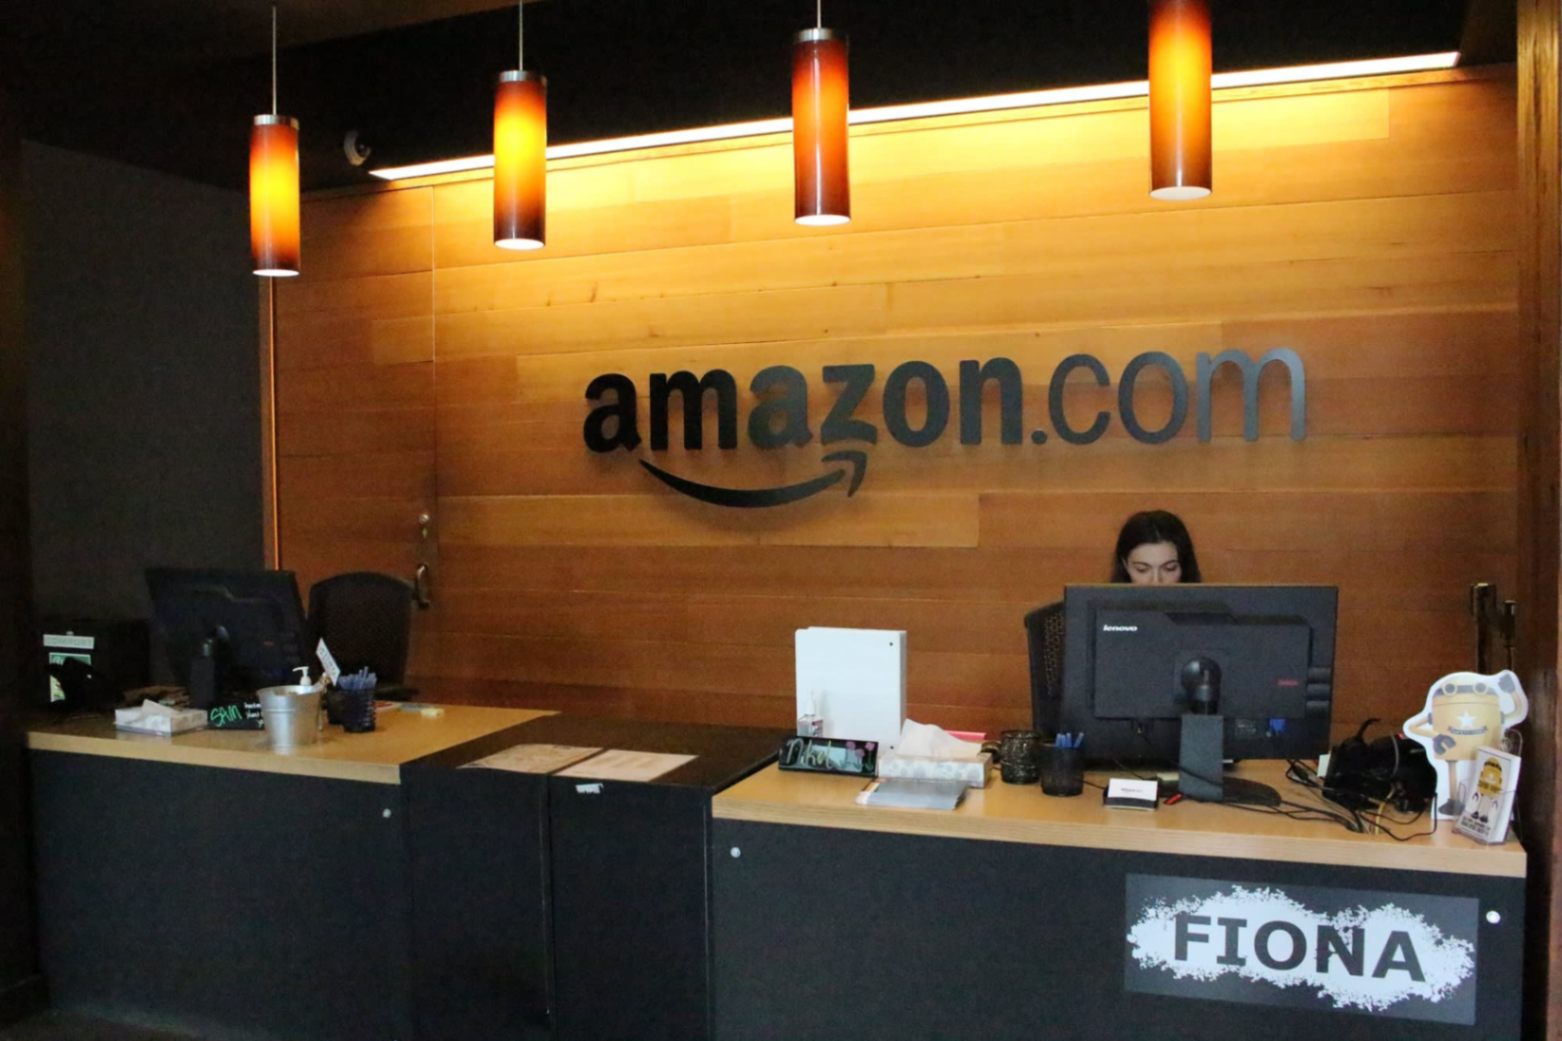 Amazon Jobs - Find Out How to Work at the Company